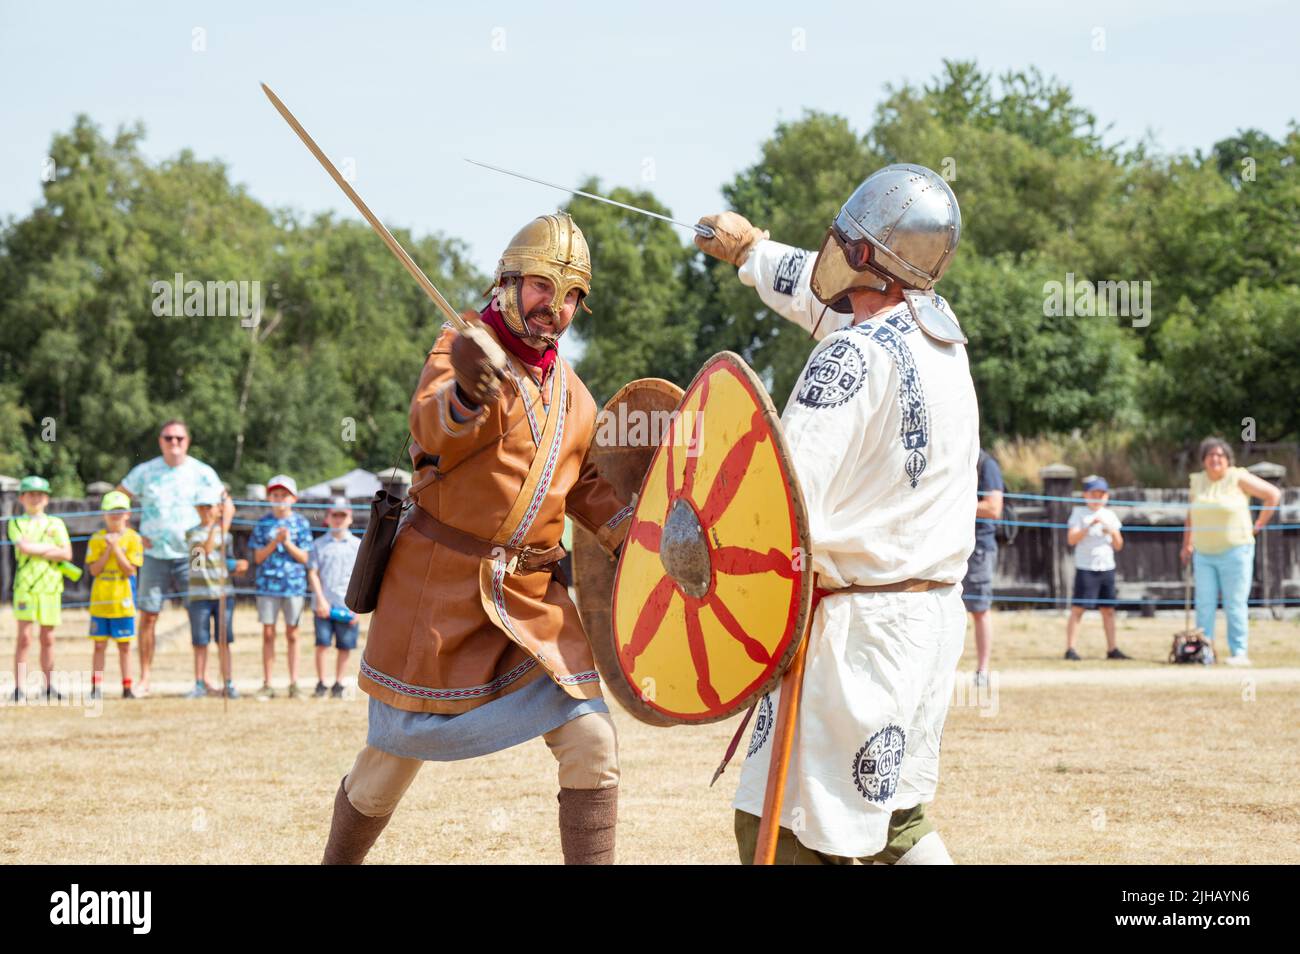 Coventry, West Midlands, UK. 17th July 2022. Roman era re-enactors at Lunt Roman Fort cool off between battles. The fort is hosting a Roman Festival this weekend. Stock Photo